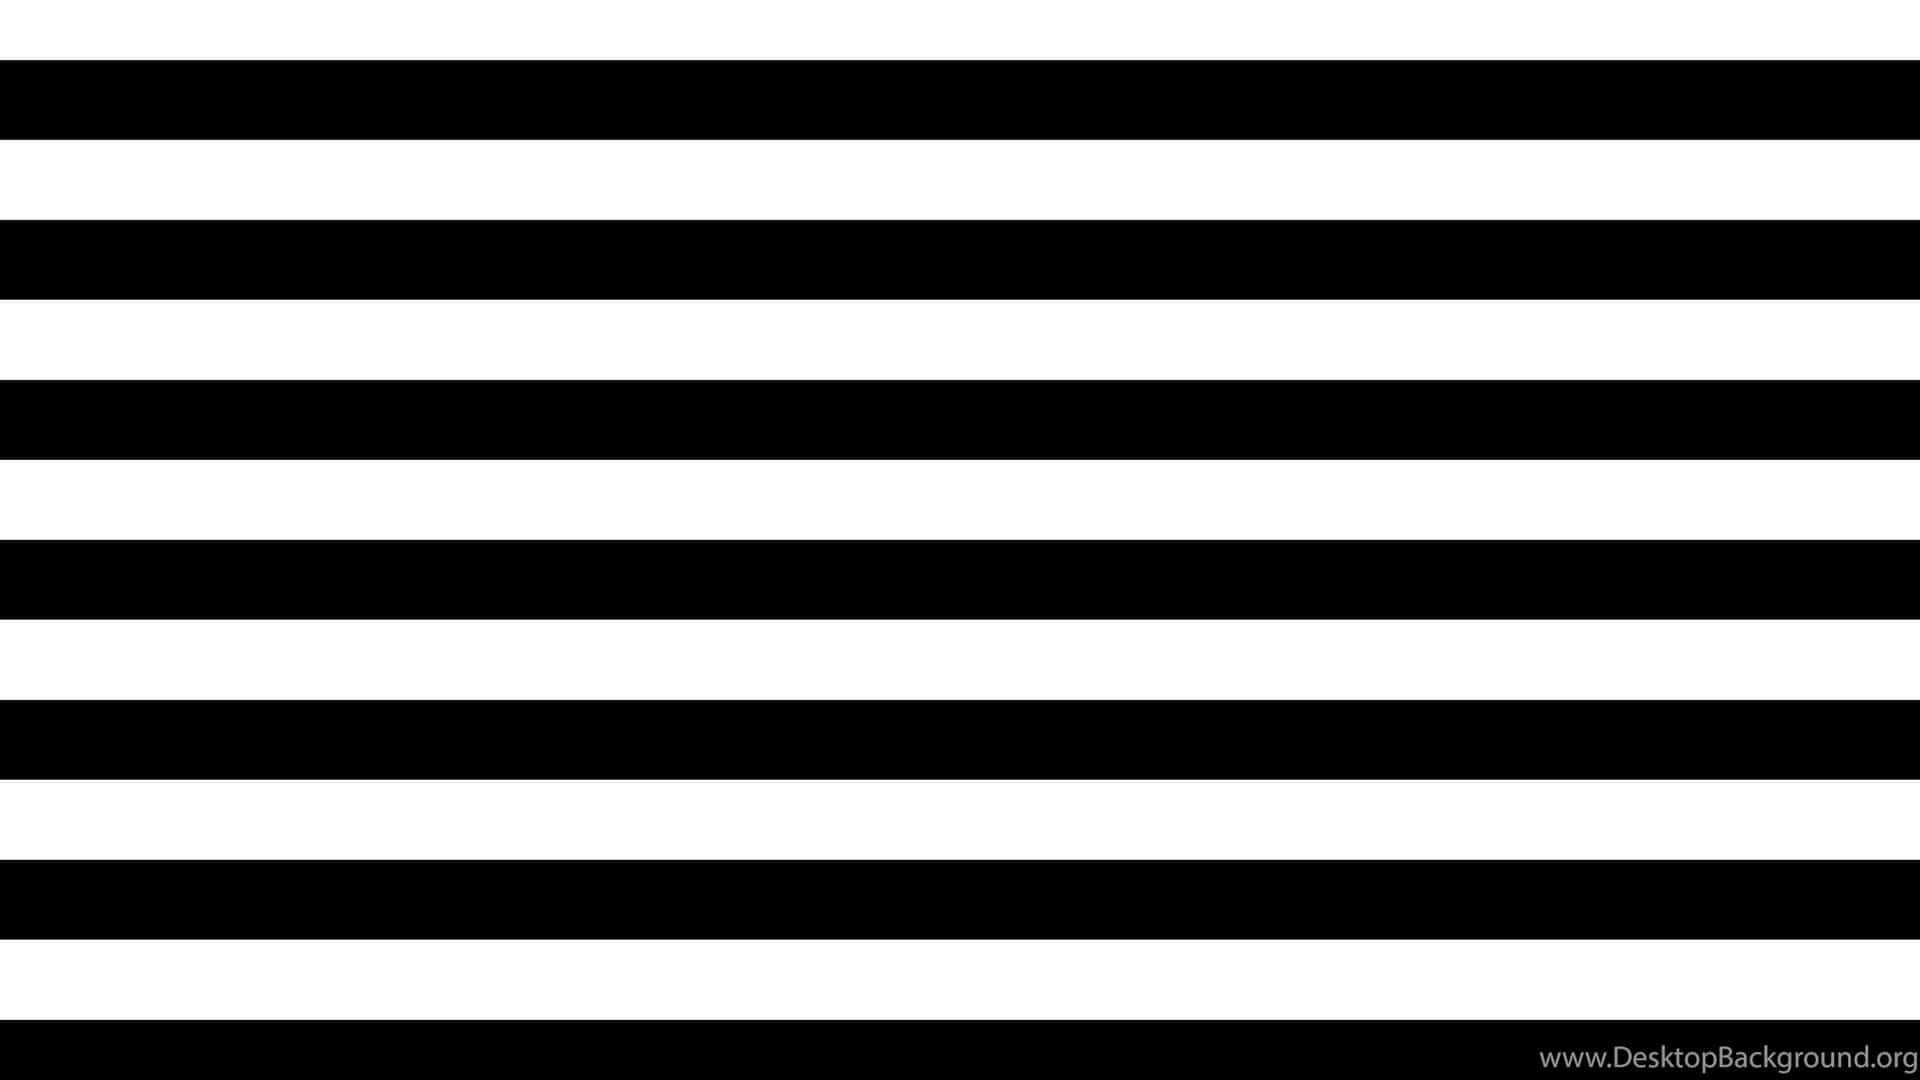 A bold black and white striped background